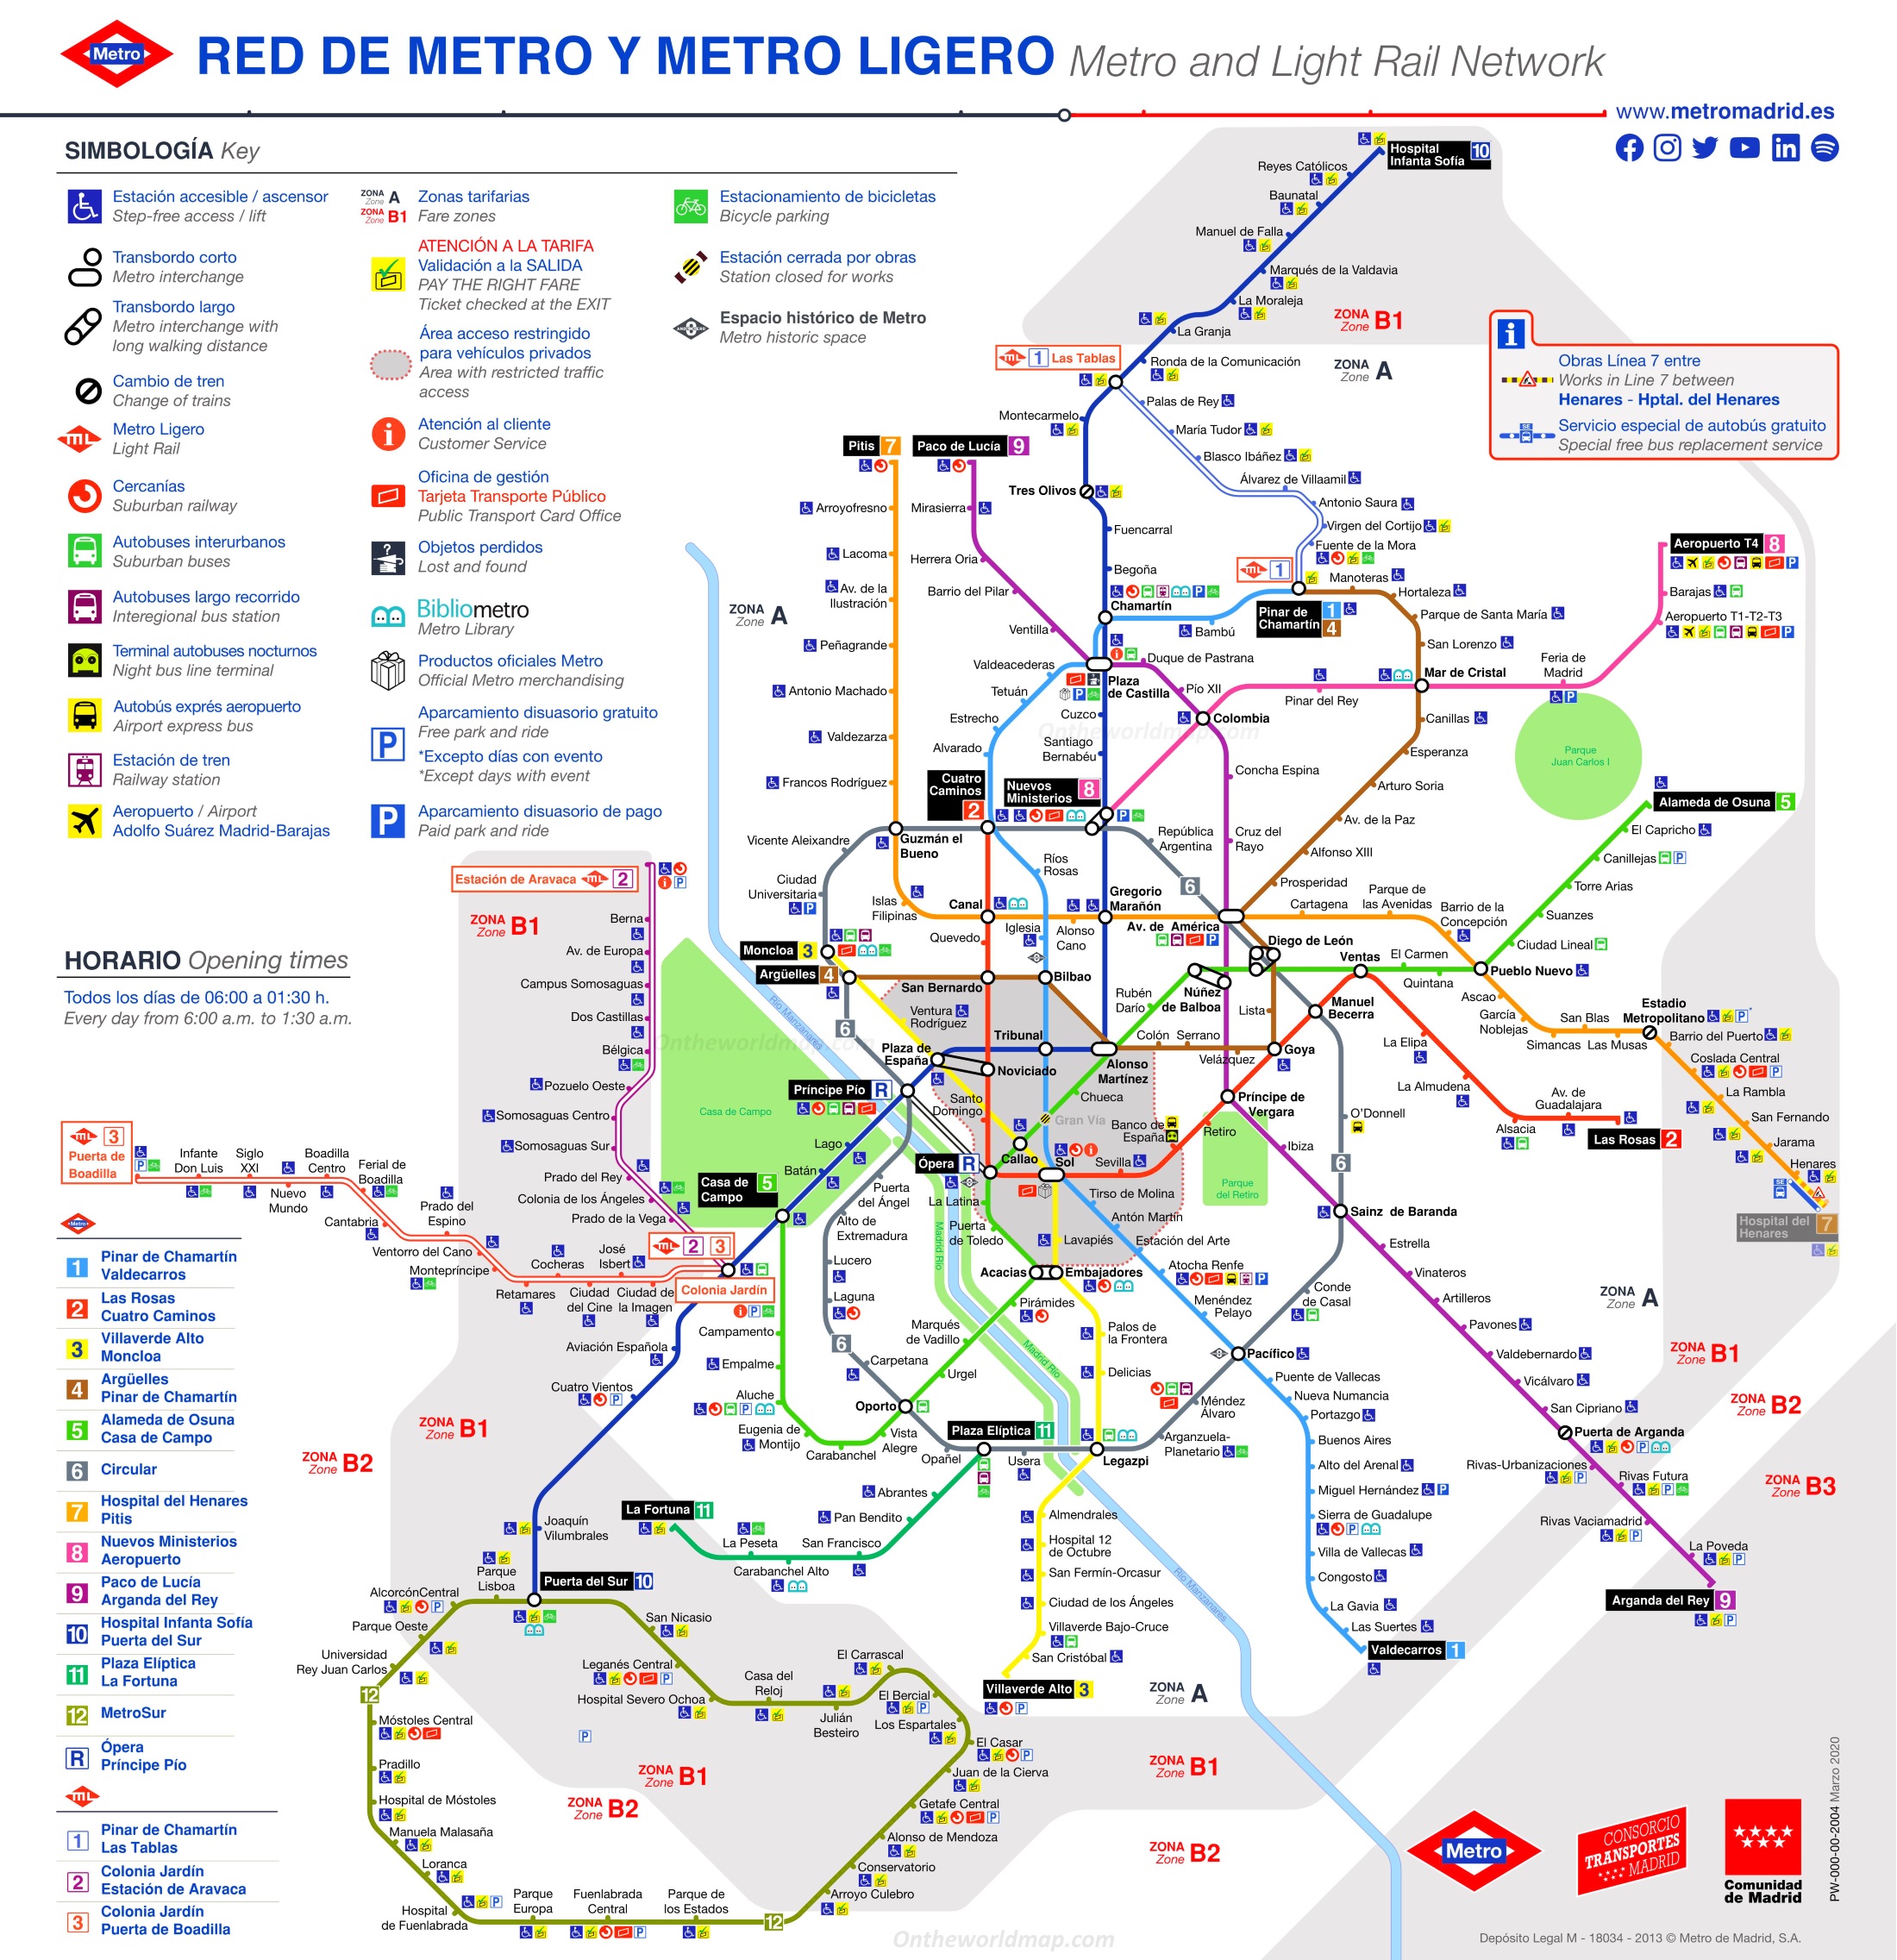 how easy it it to take the metro from madrid airport to city center